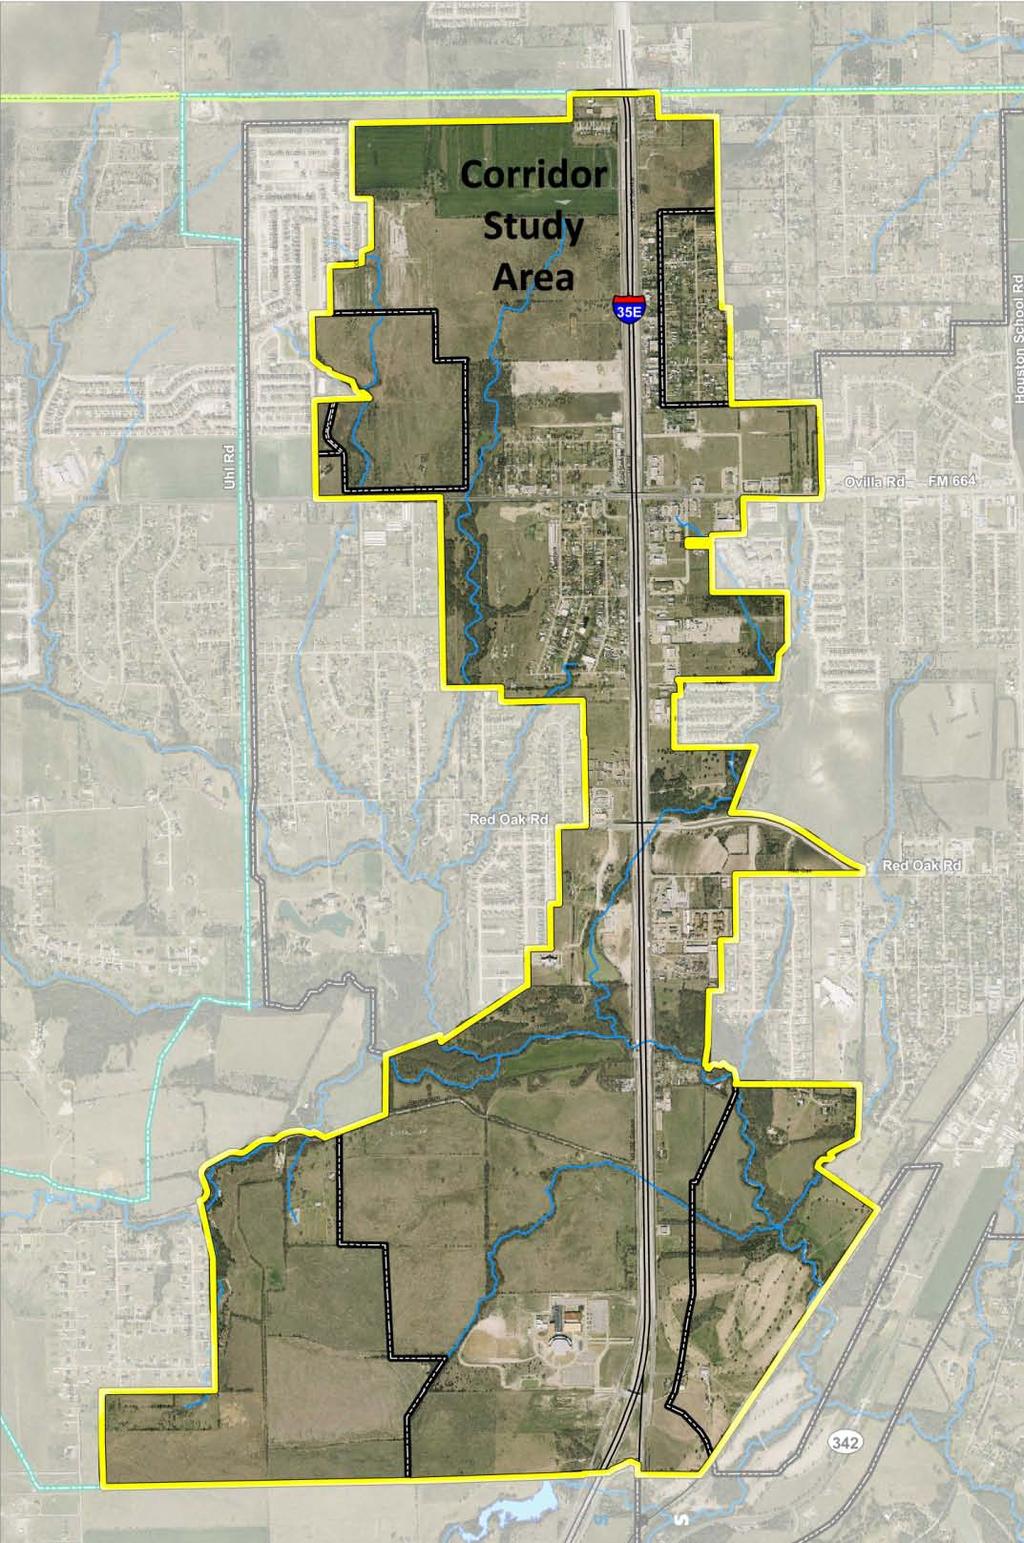 STUDY AREA BOUNDARY Based on input received at CAC meetings as well as geographic analysis of the area, the planning team has defined a corridor study area to serve as the focus